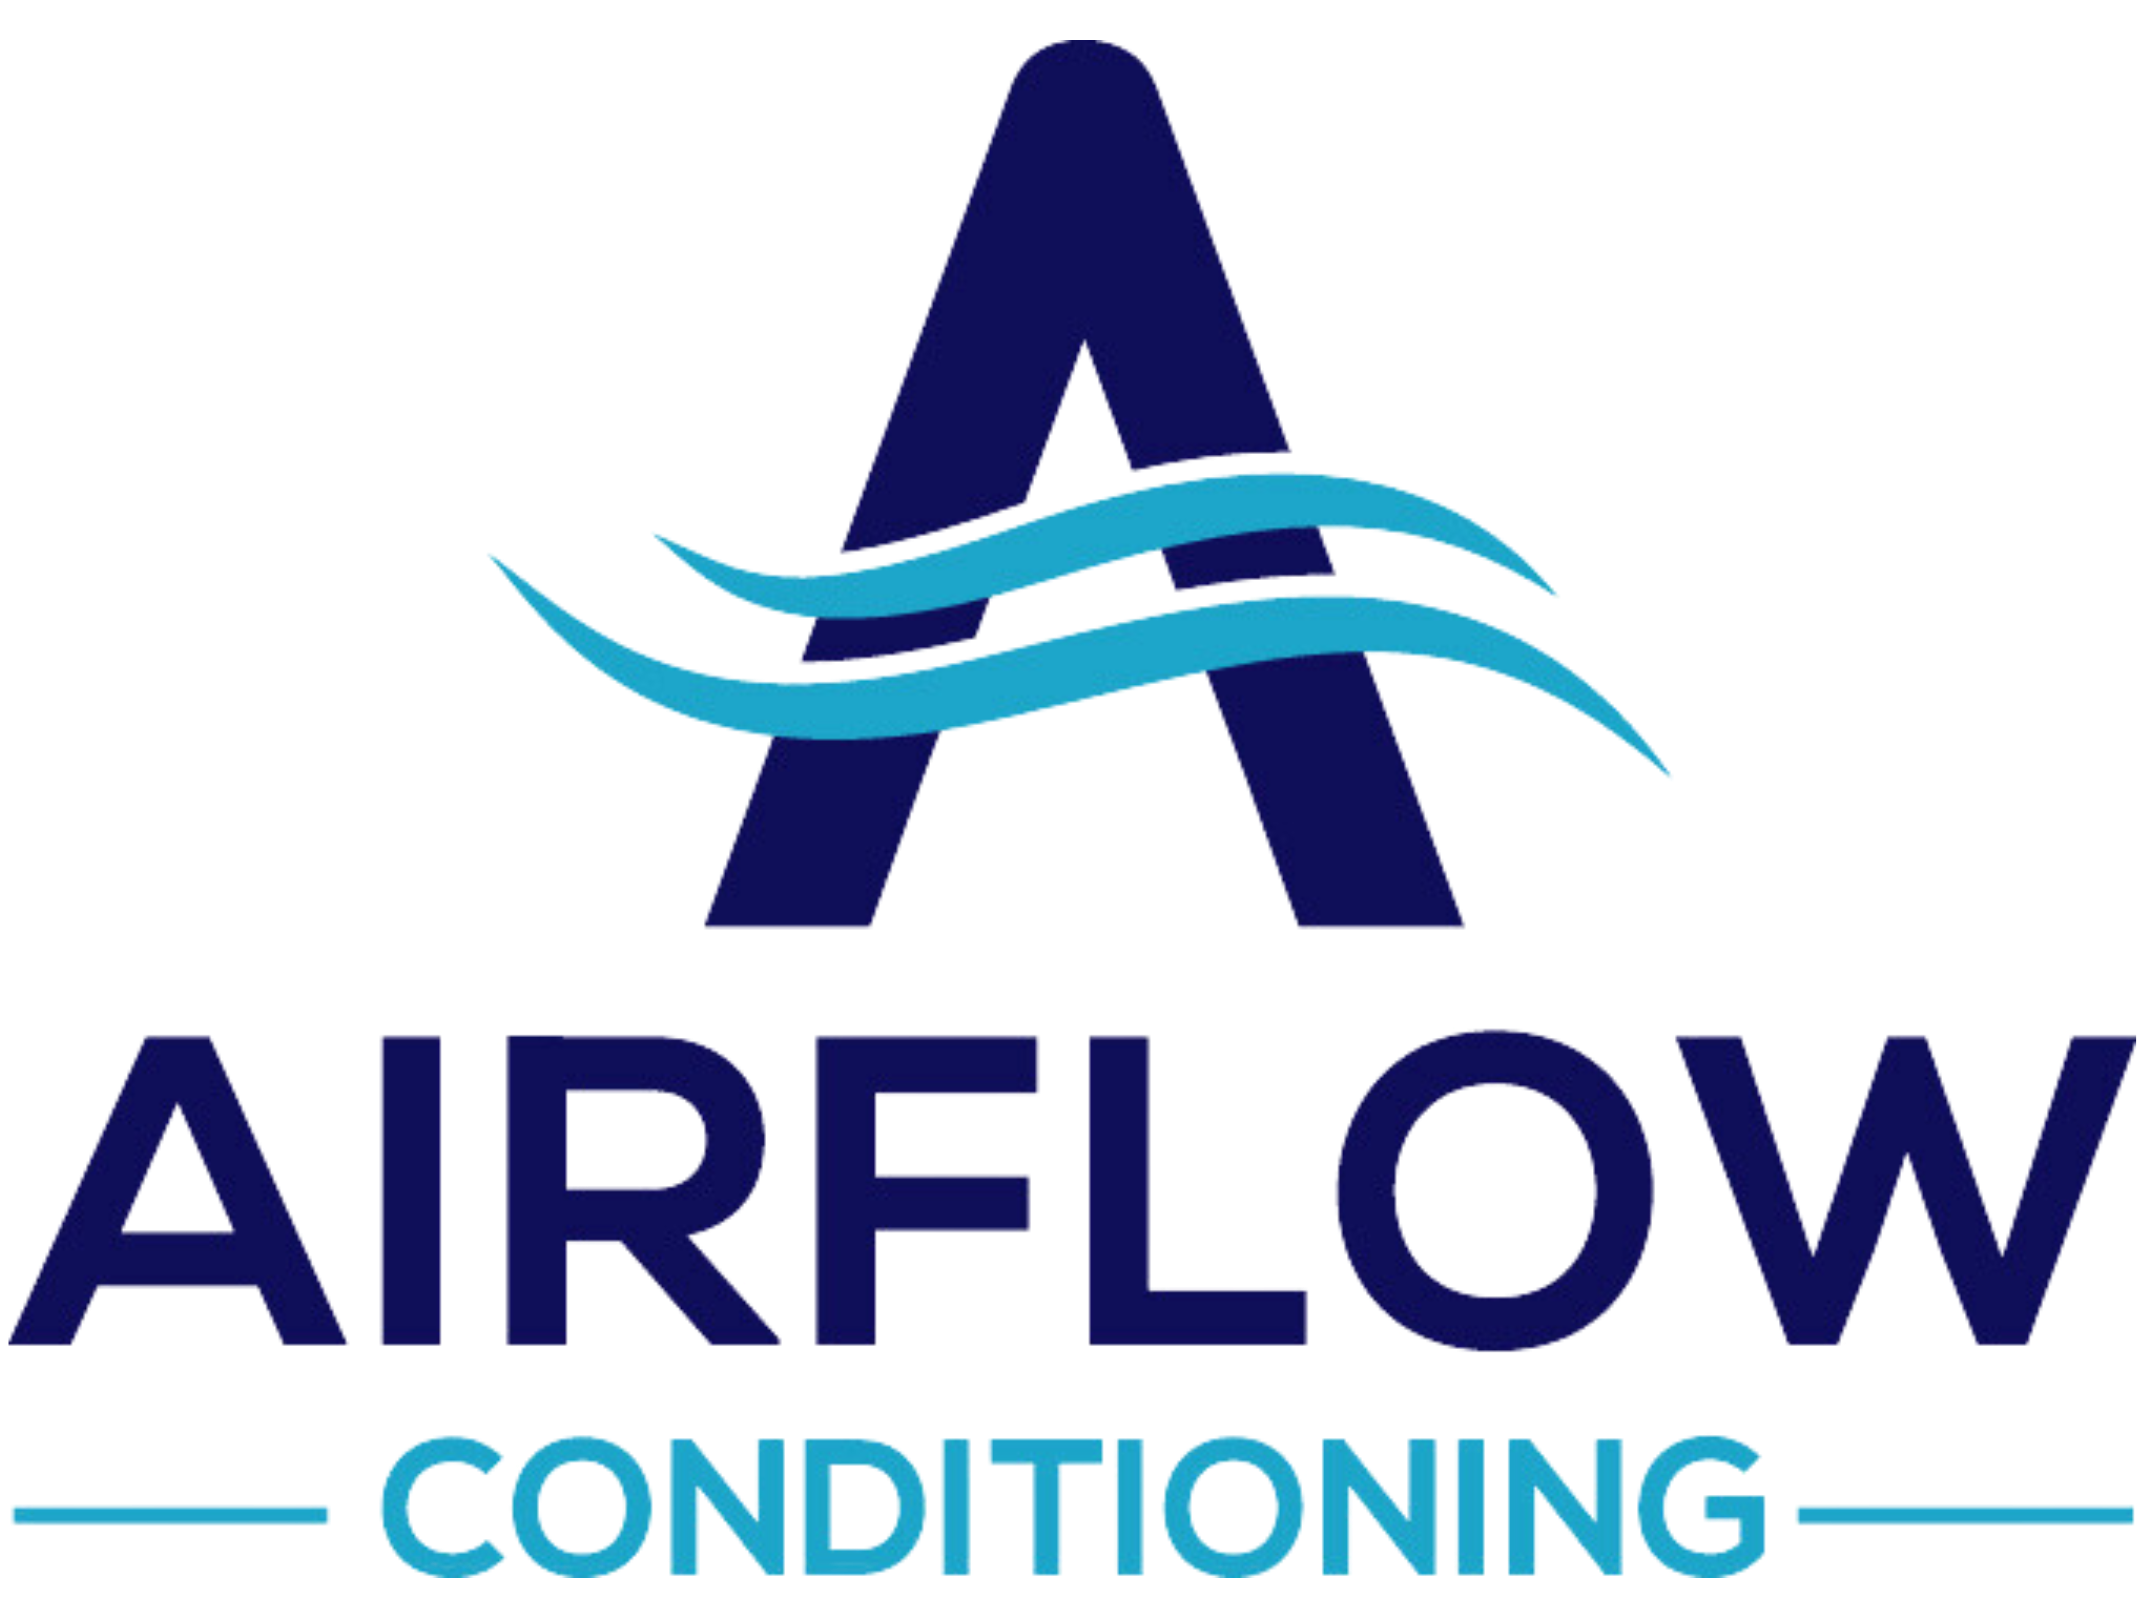 AirFlow Conditioning Services